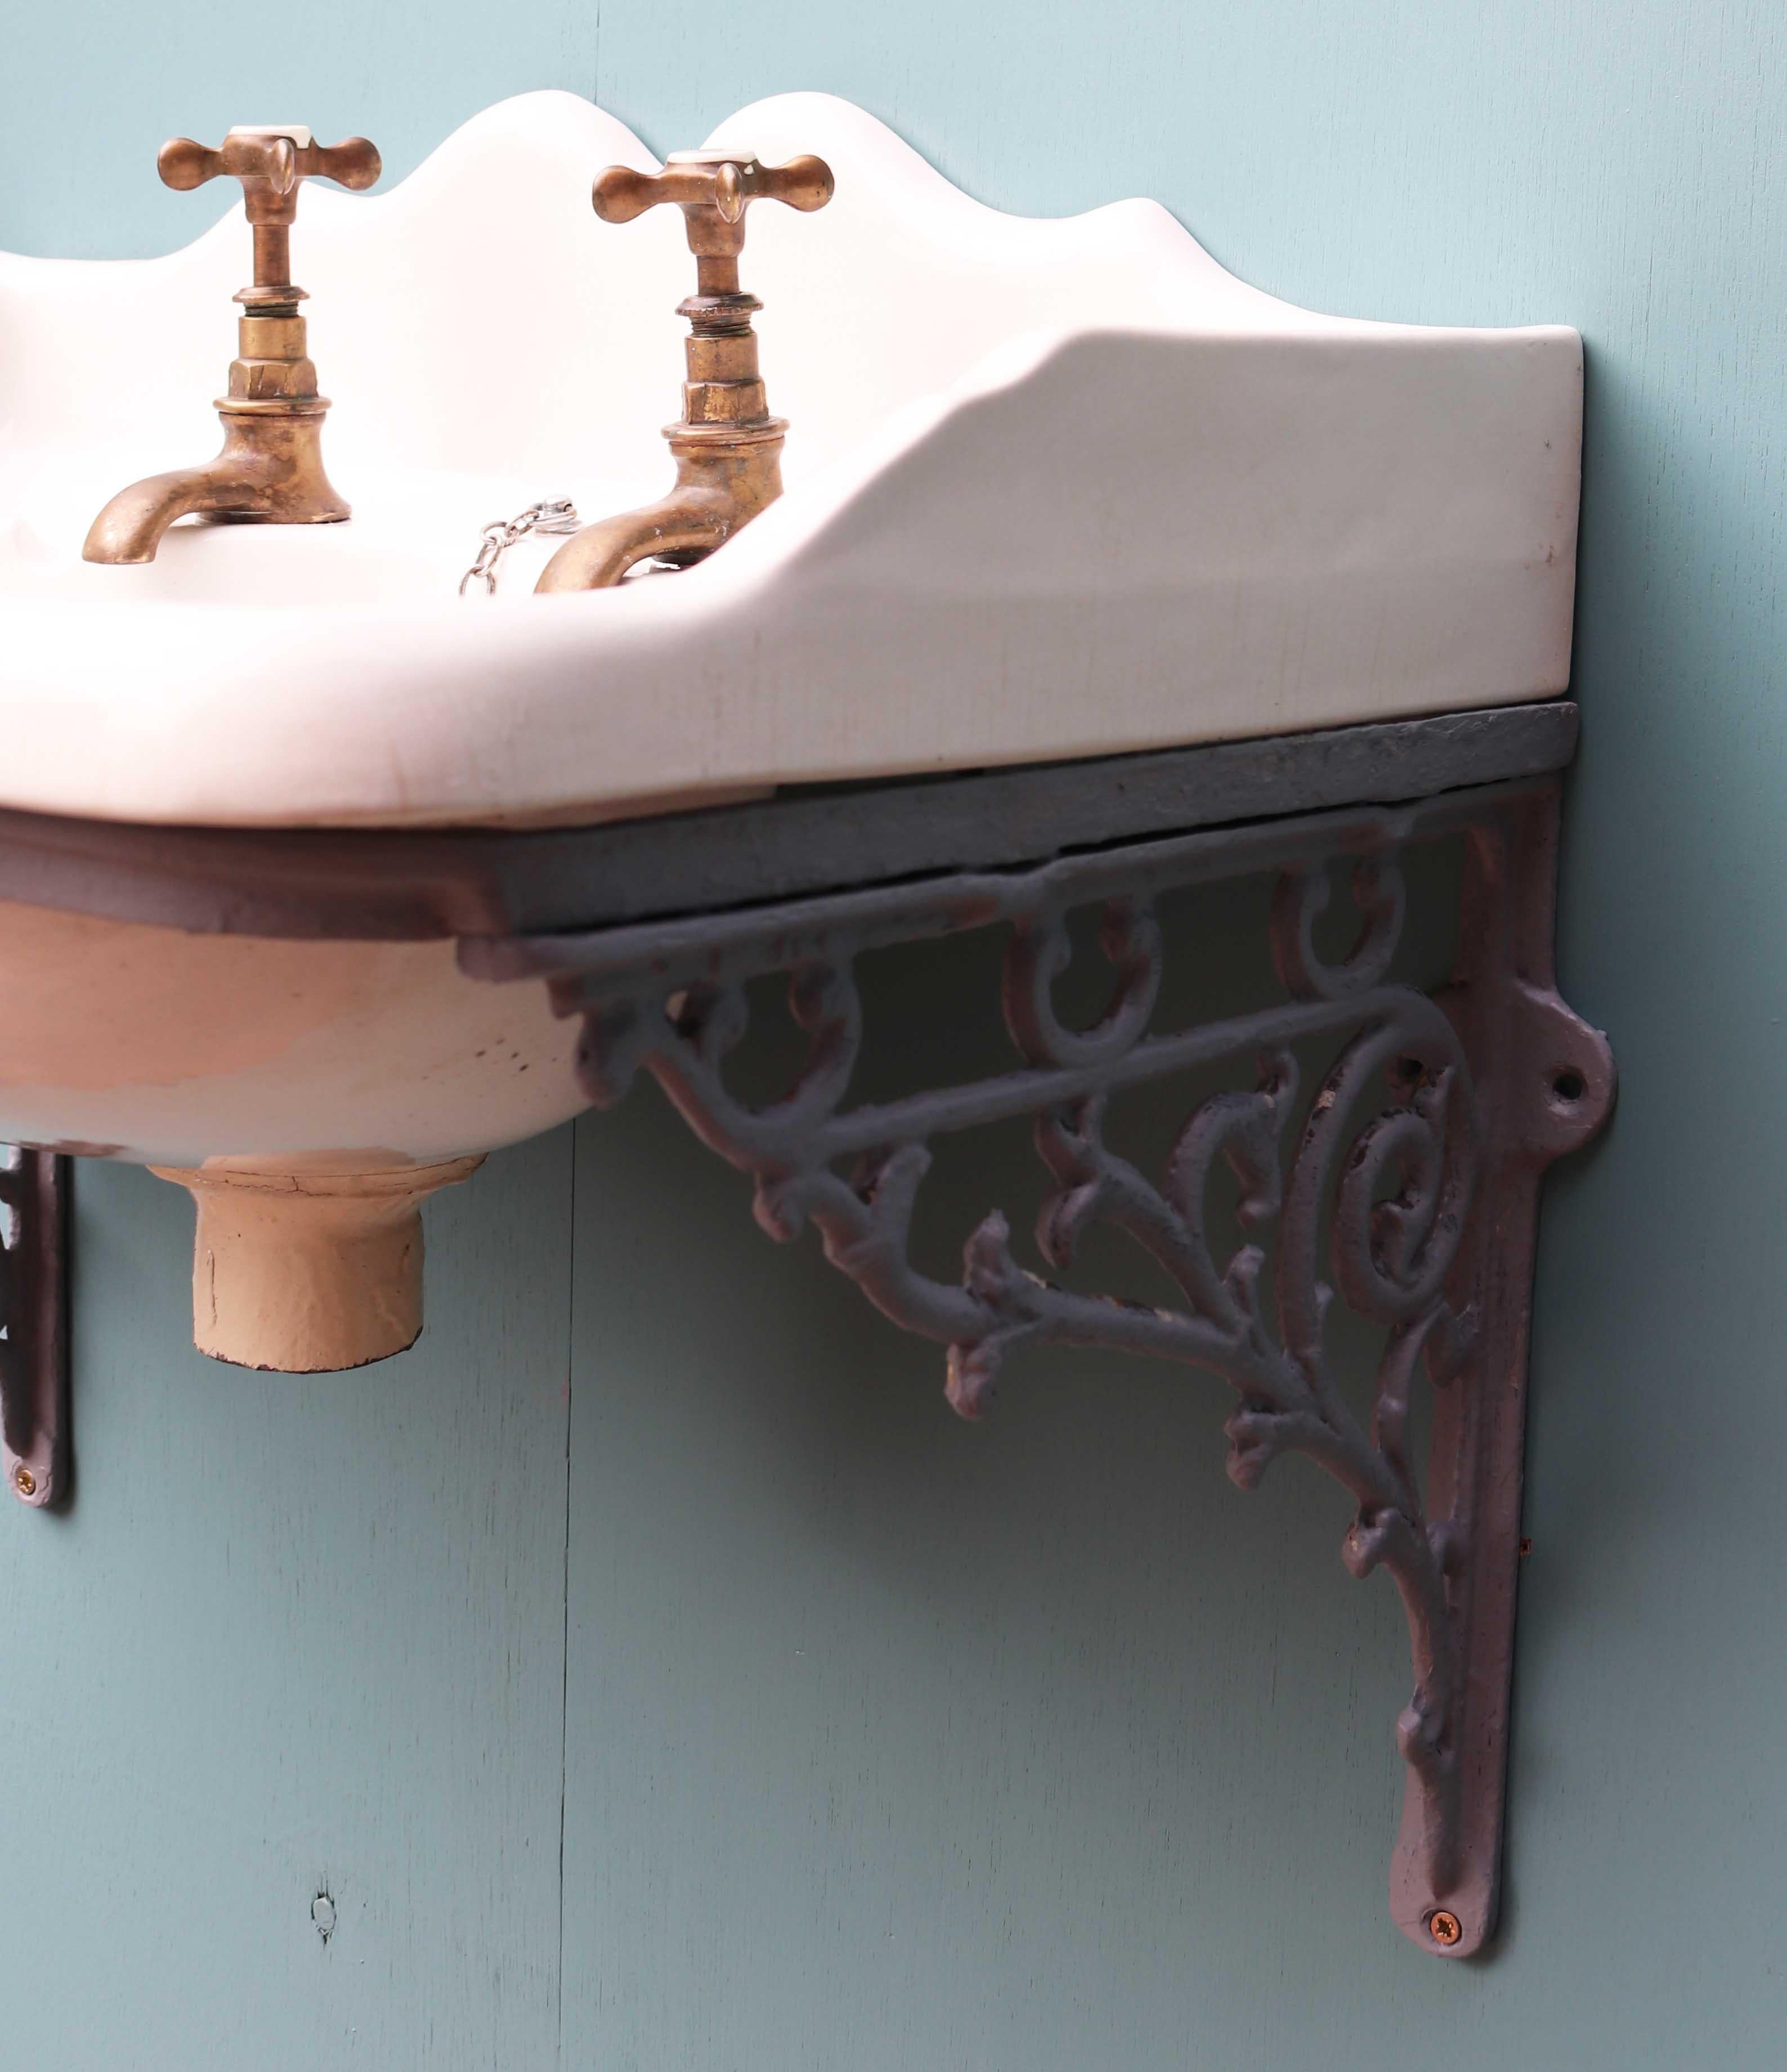 About

A reclaimed antique sink with wall-mounted bracket. Stamped ‘The Progress’. And dated 17/10/1931.

Condition report

Light crazing to the porcelain basin. No chips, cracks or breaks. Fitted with original taps which turn, but not tested.